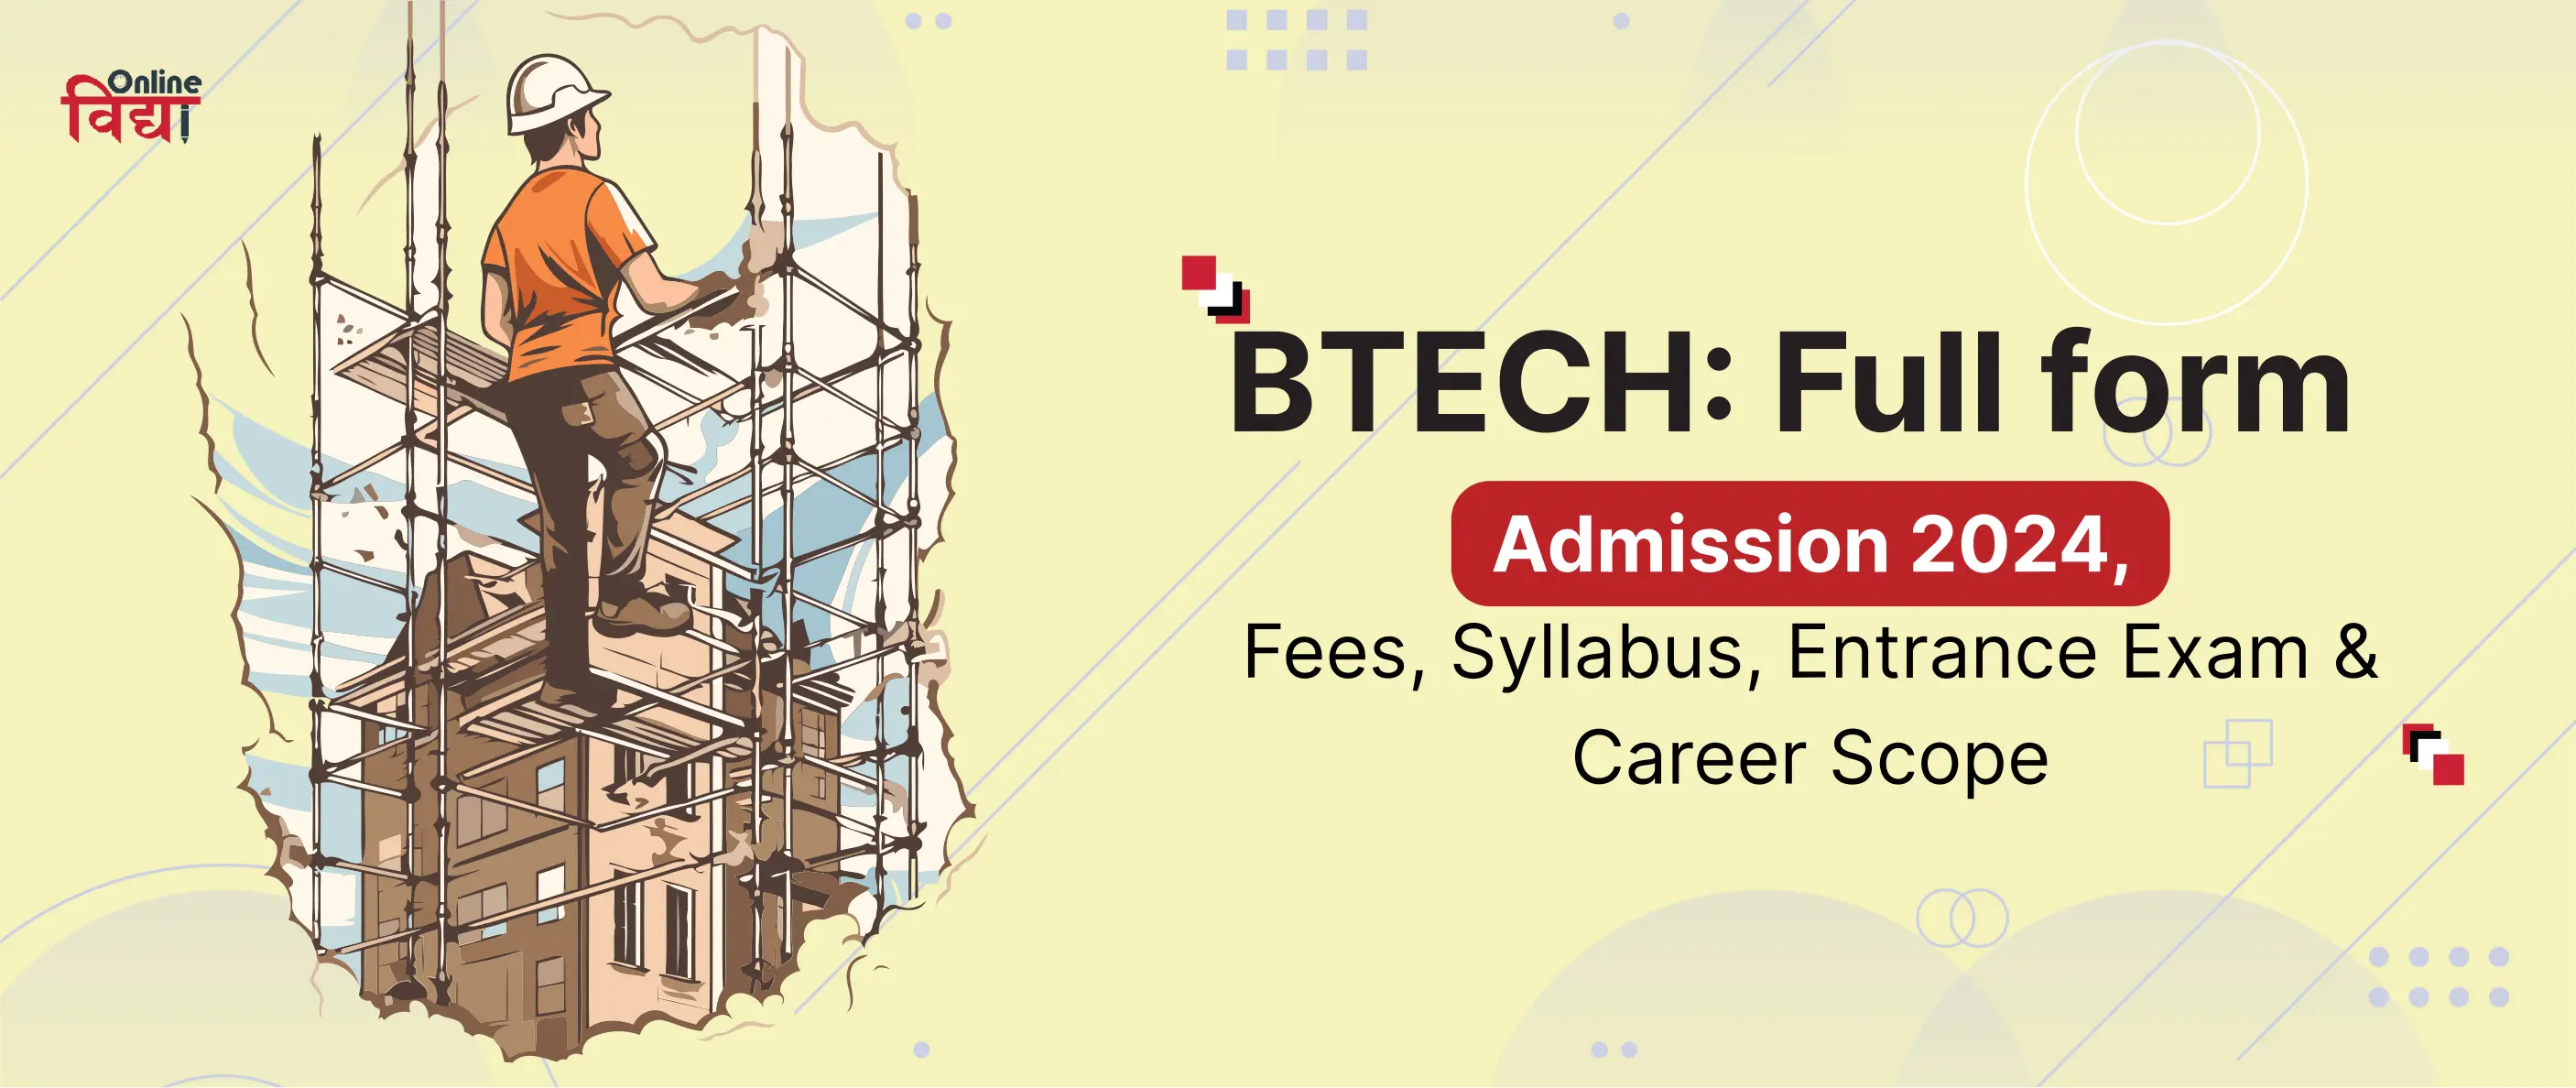 BTech: Full form, Admission 2024, Fees, Syllabus, Entrance Exam & Career Scope